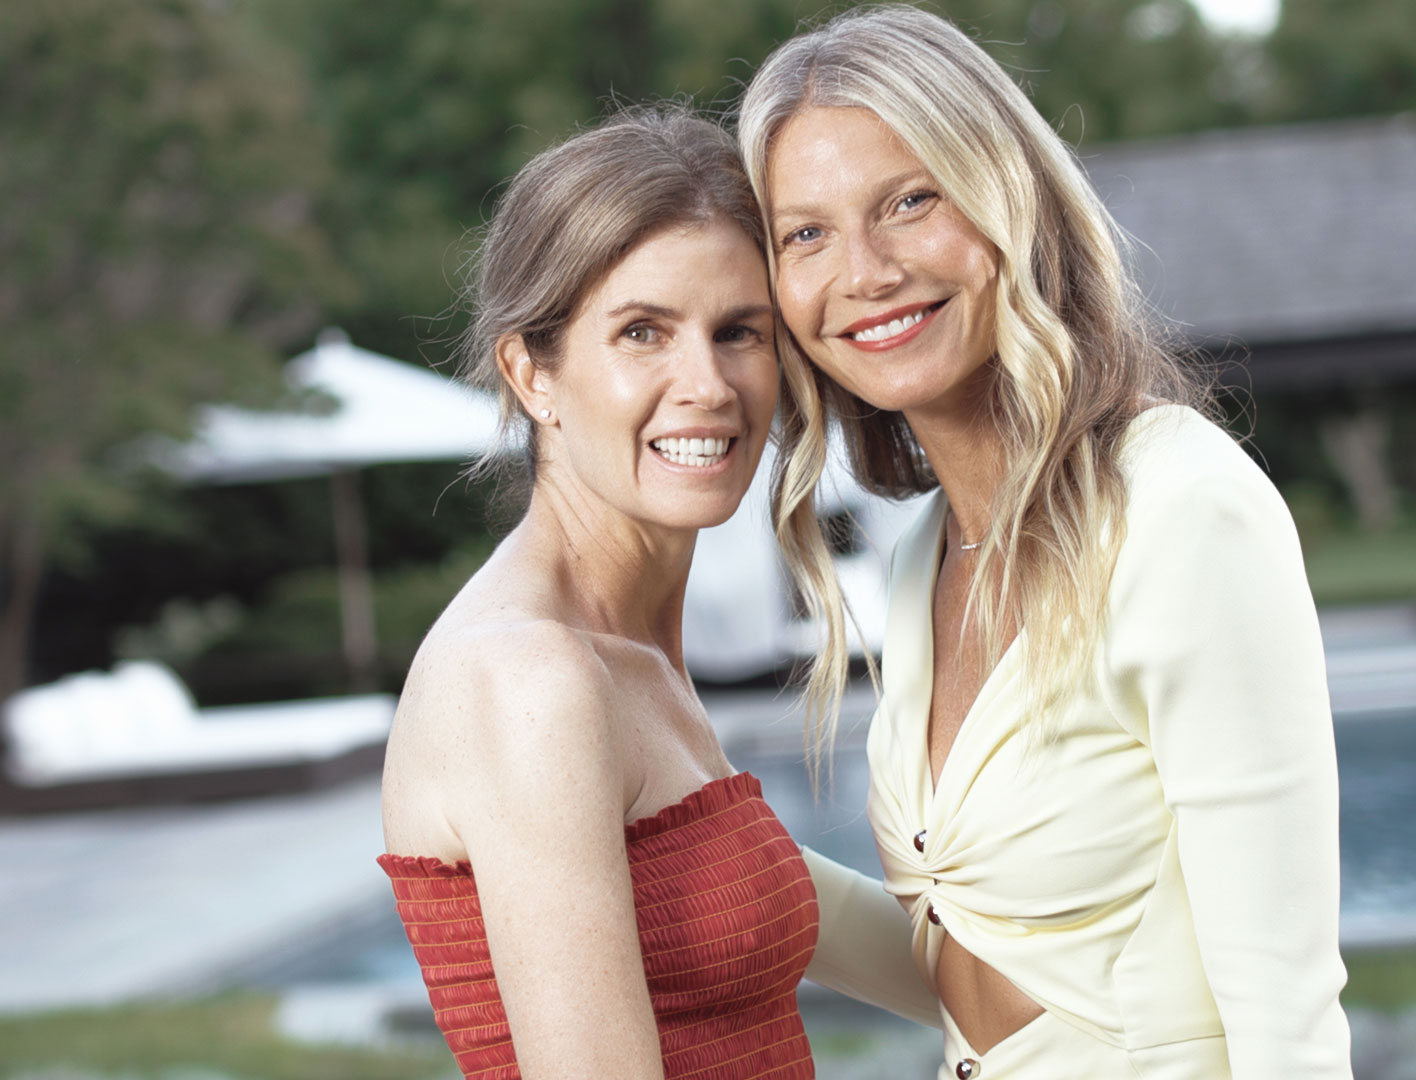 Gwyneth Paltrow's Backyard Makeup Session With Gucci Westman | goop